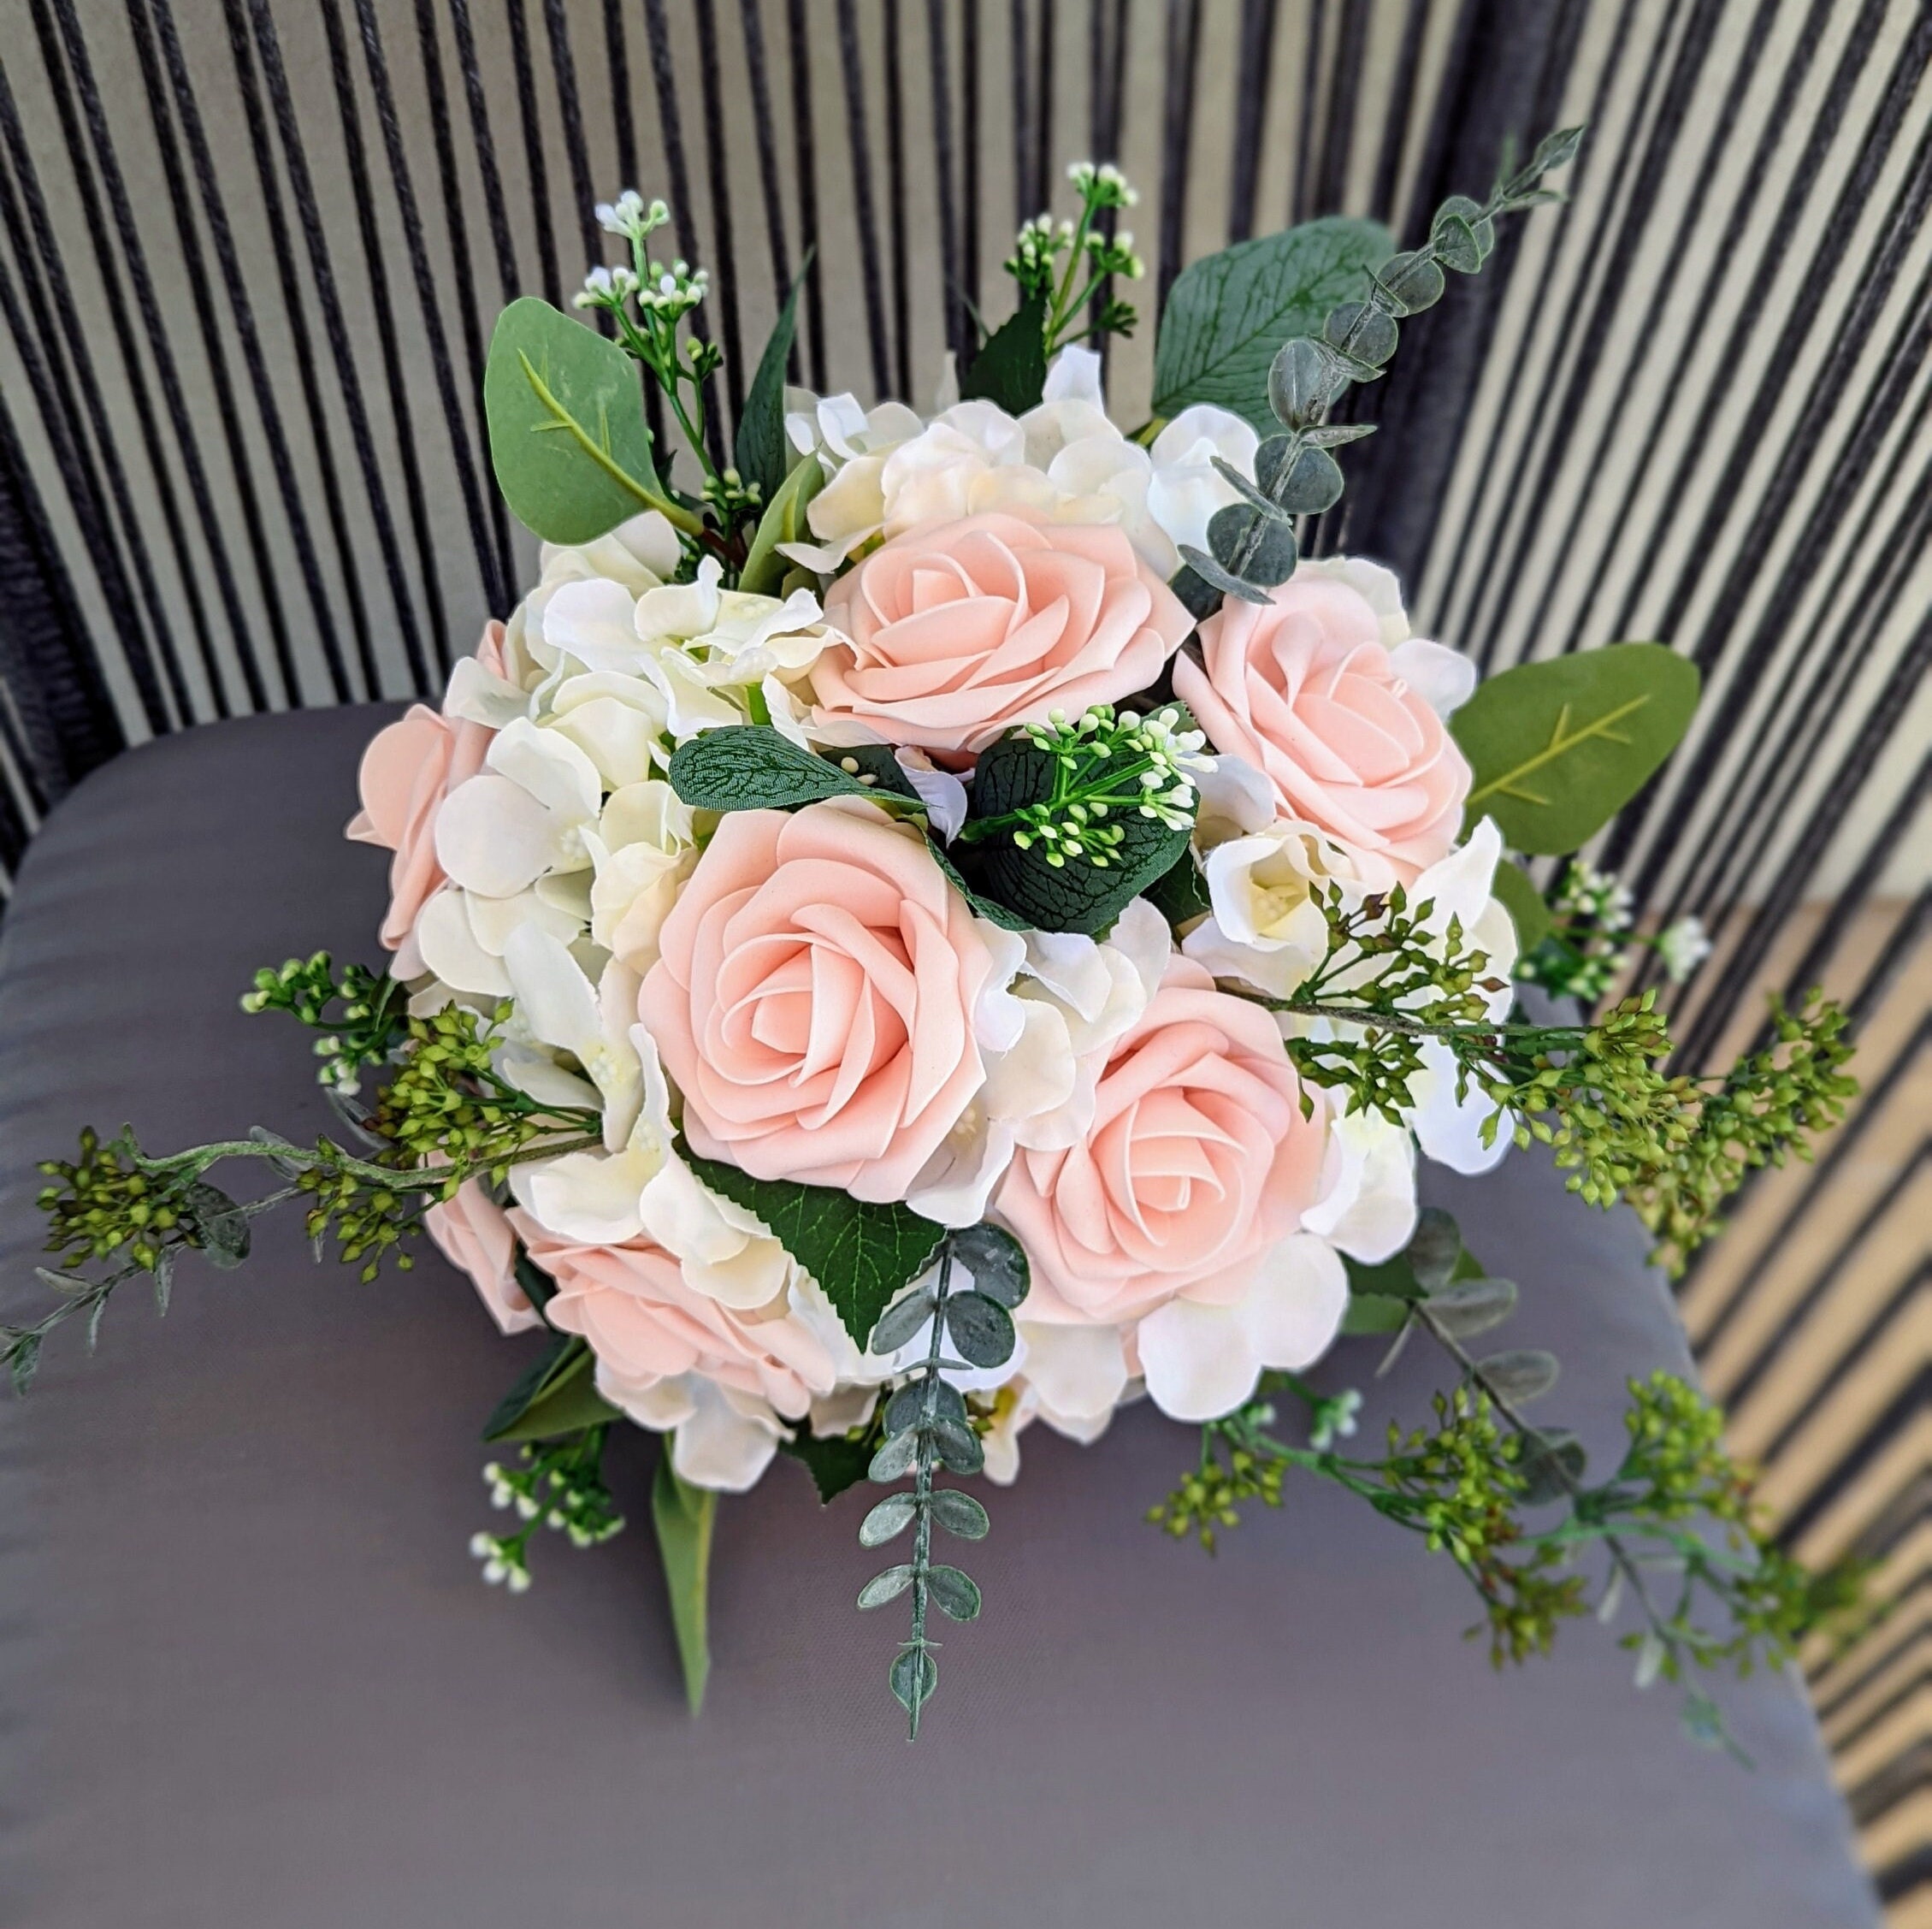 Image of Bouquet of white hydrangeas with pink accents